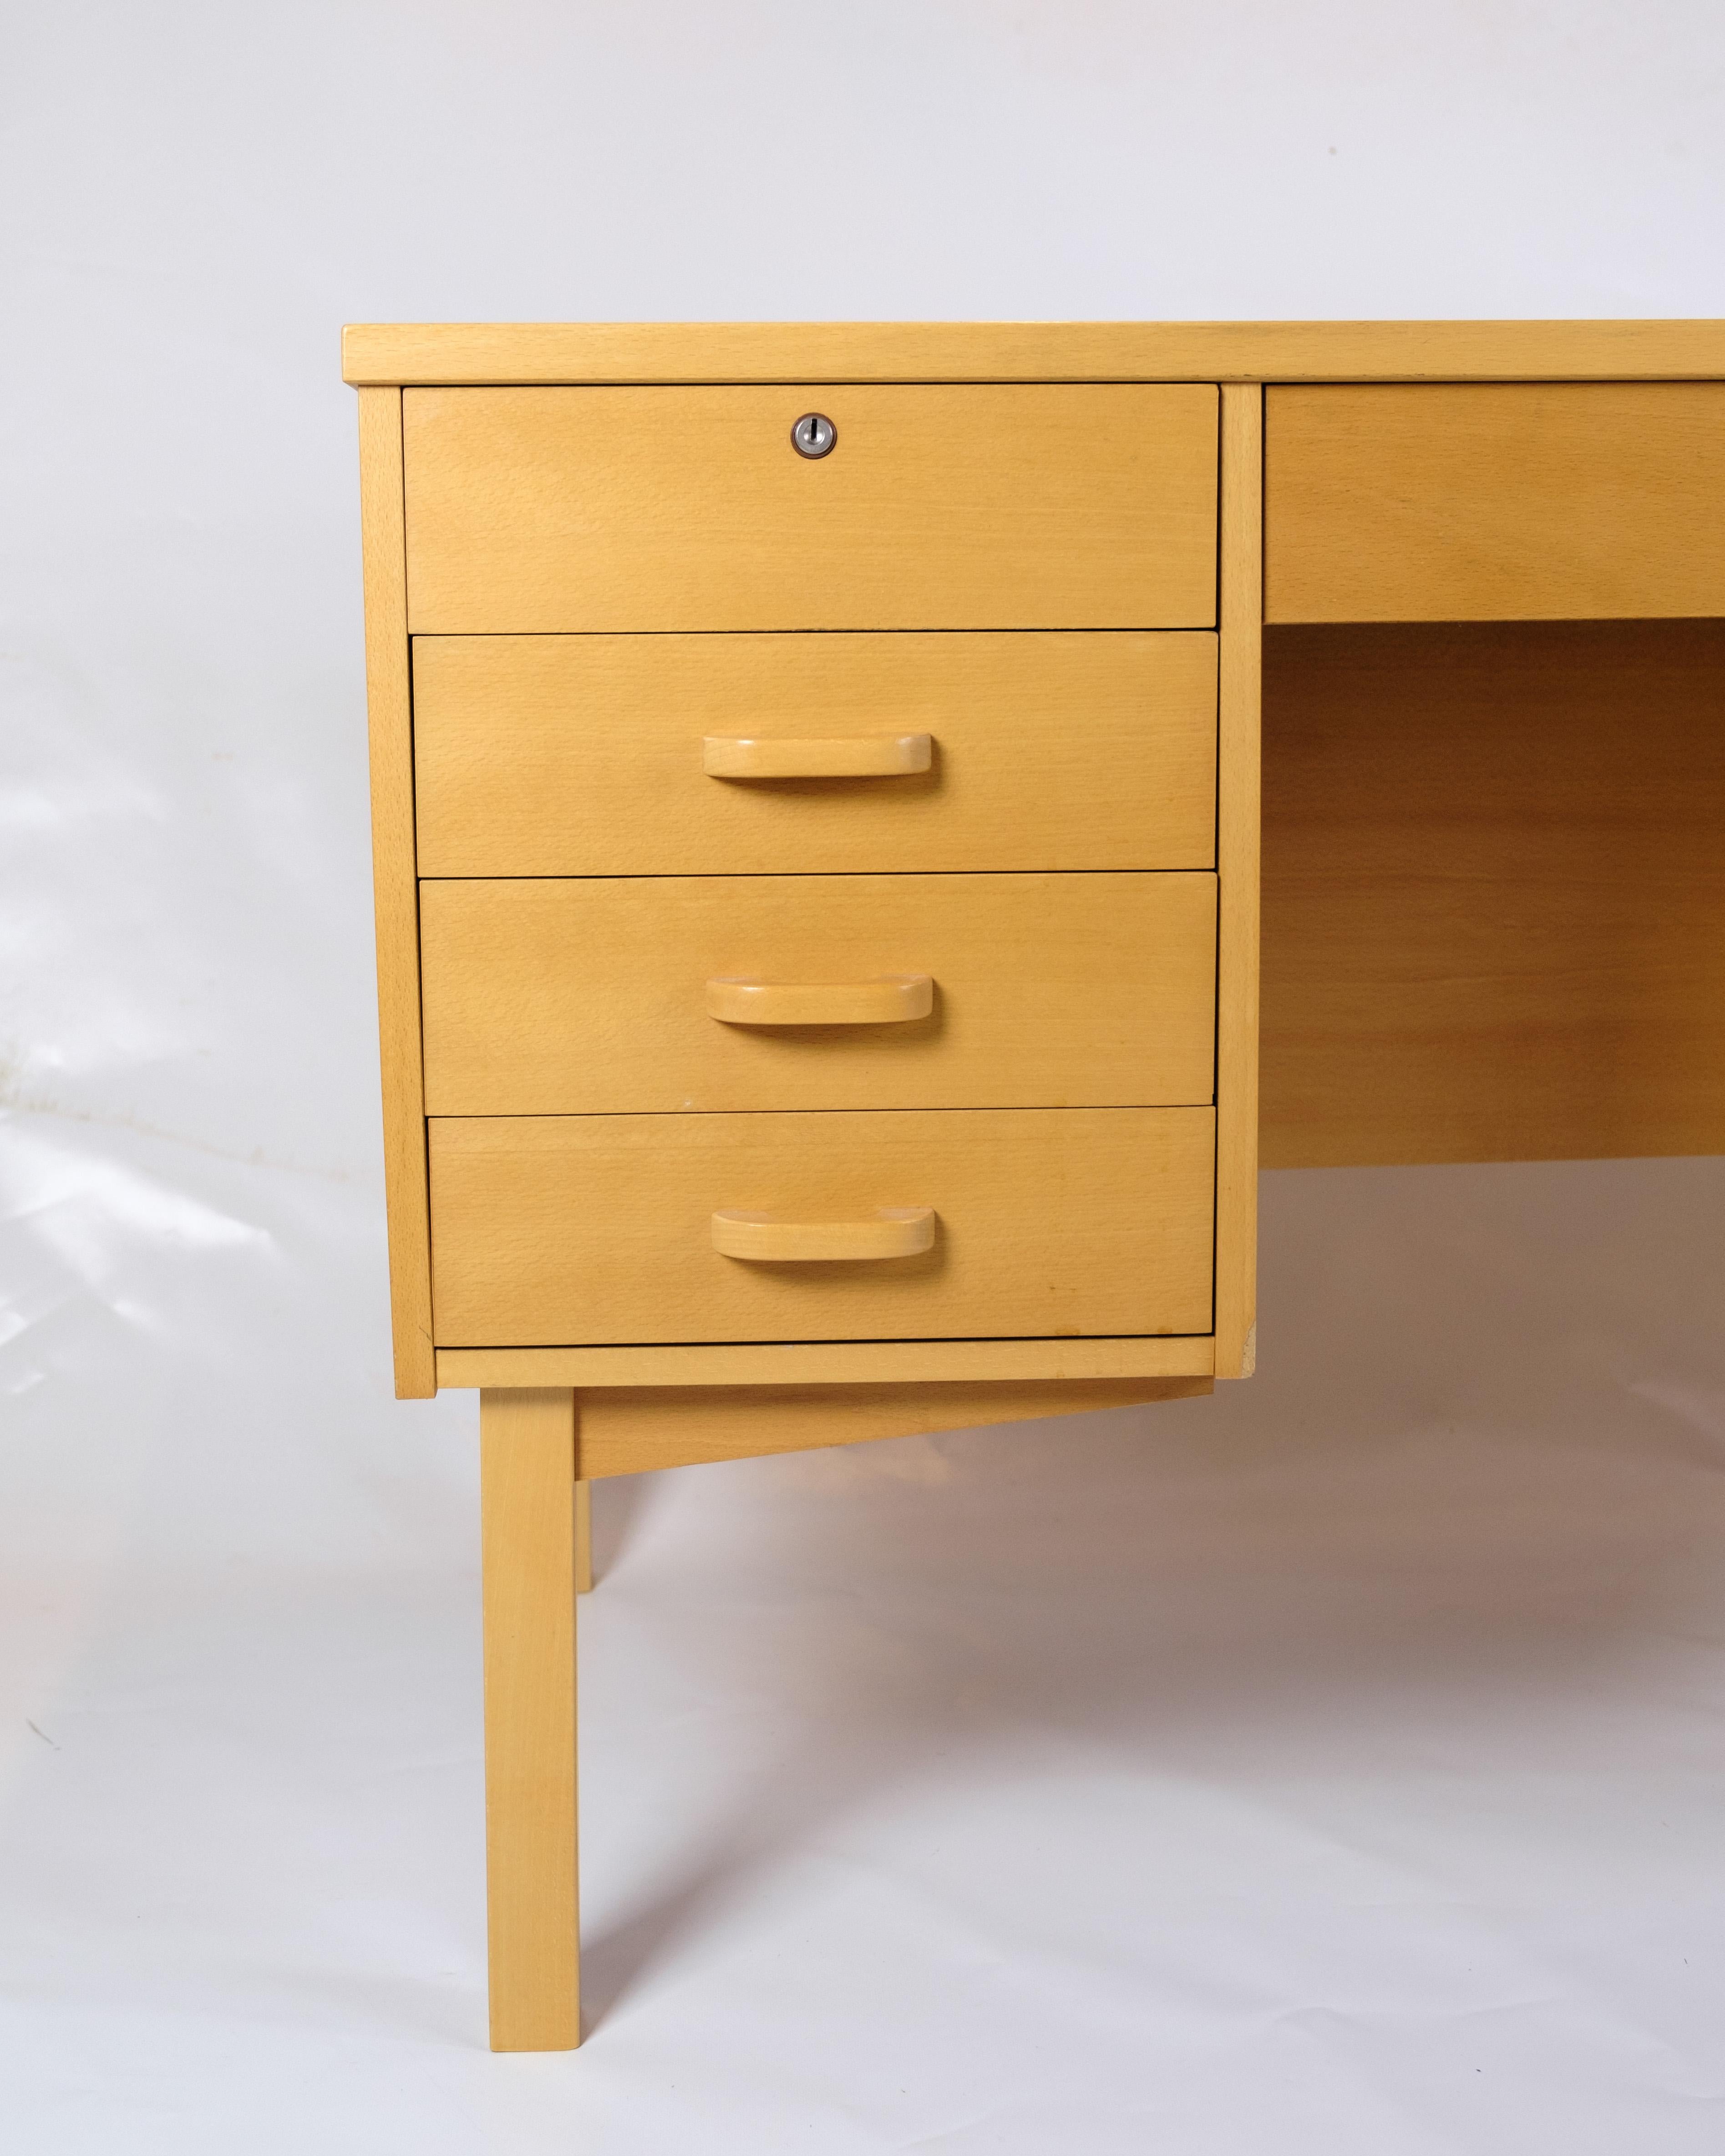 This desk is a great example of Danish design from the 1960s. Made from beech wood, it exudes a timeless elegance and simplicity that is characteristic of Scandinavian design. With its slim and functional design, this desk fits perfectly into modern